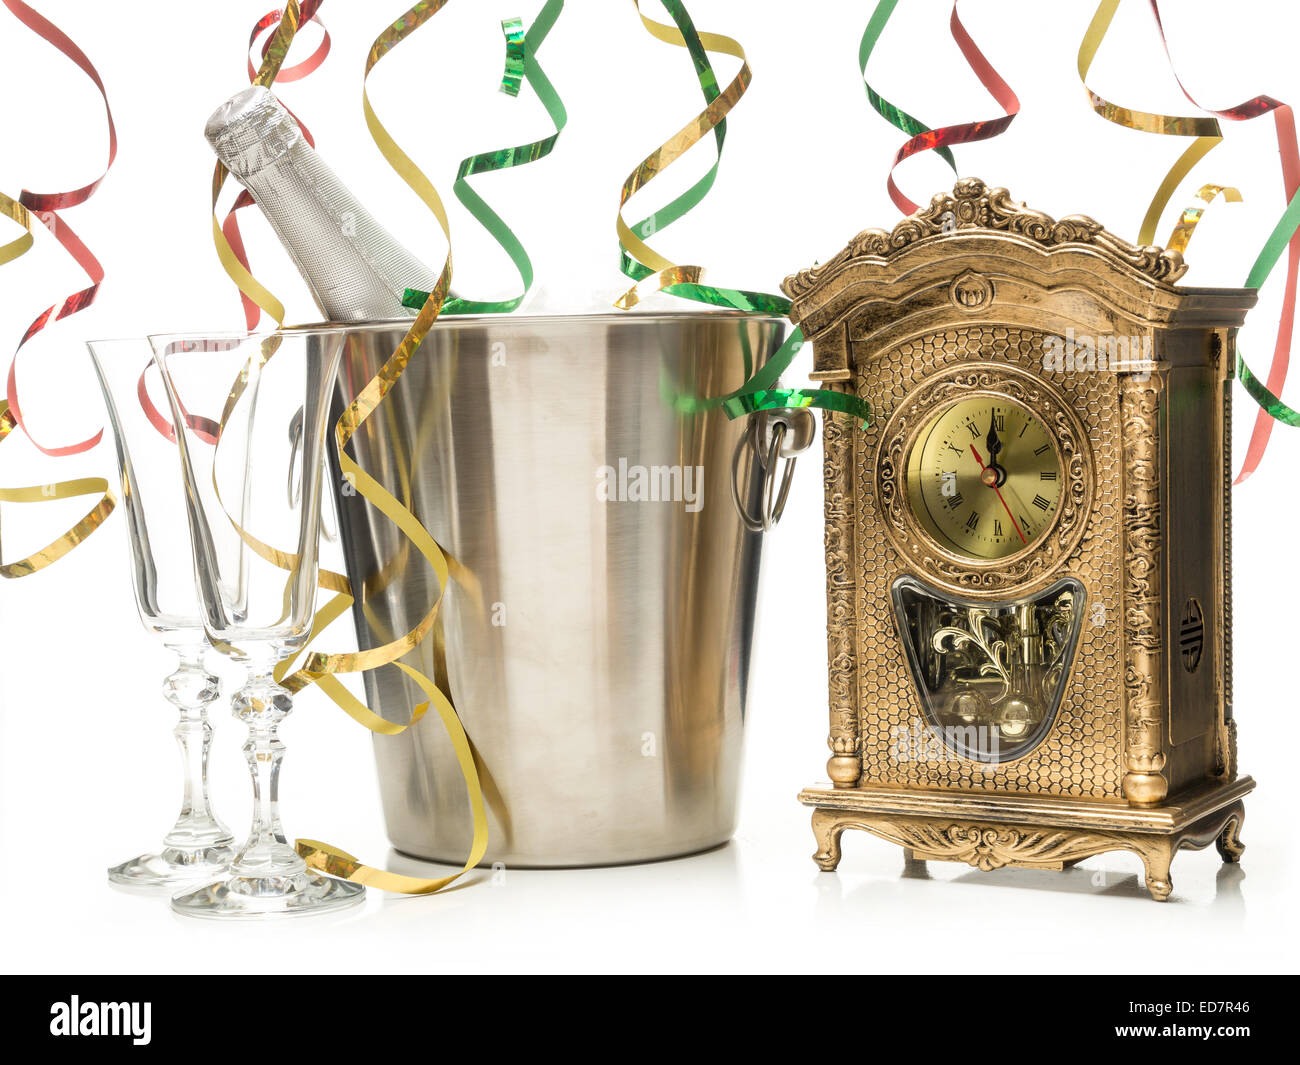 New Year champagne bottle in cooler, two champagne glasses and table clock showing midnight shot on white Stock Photo